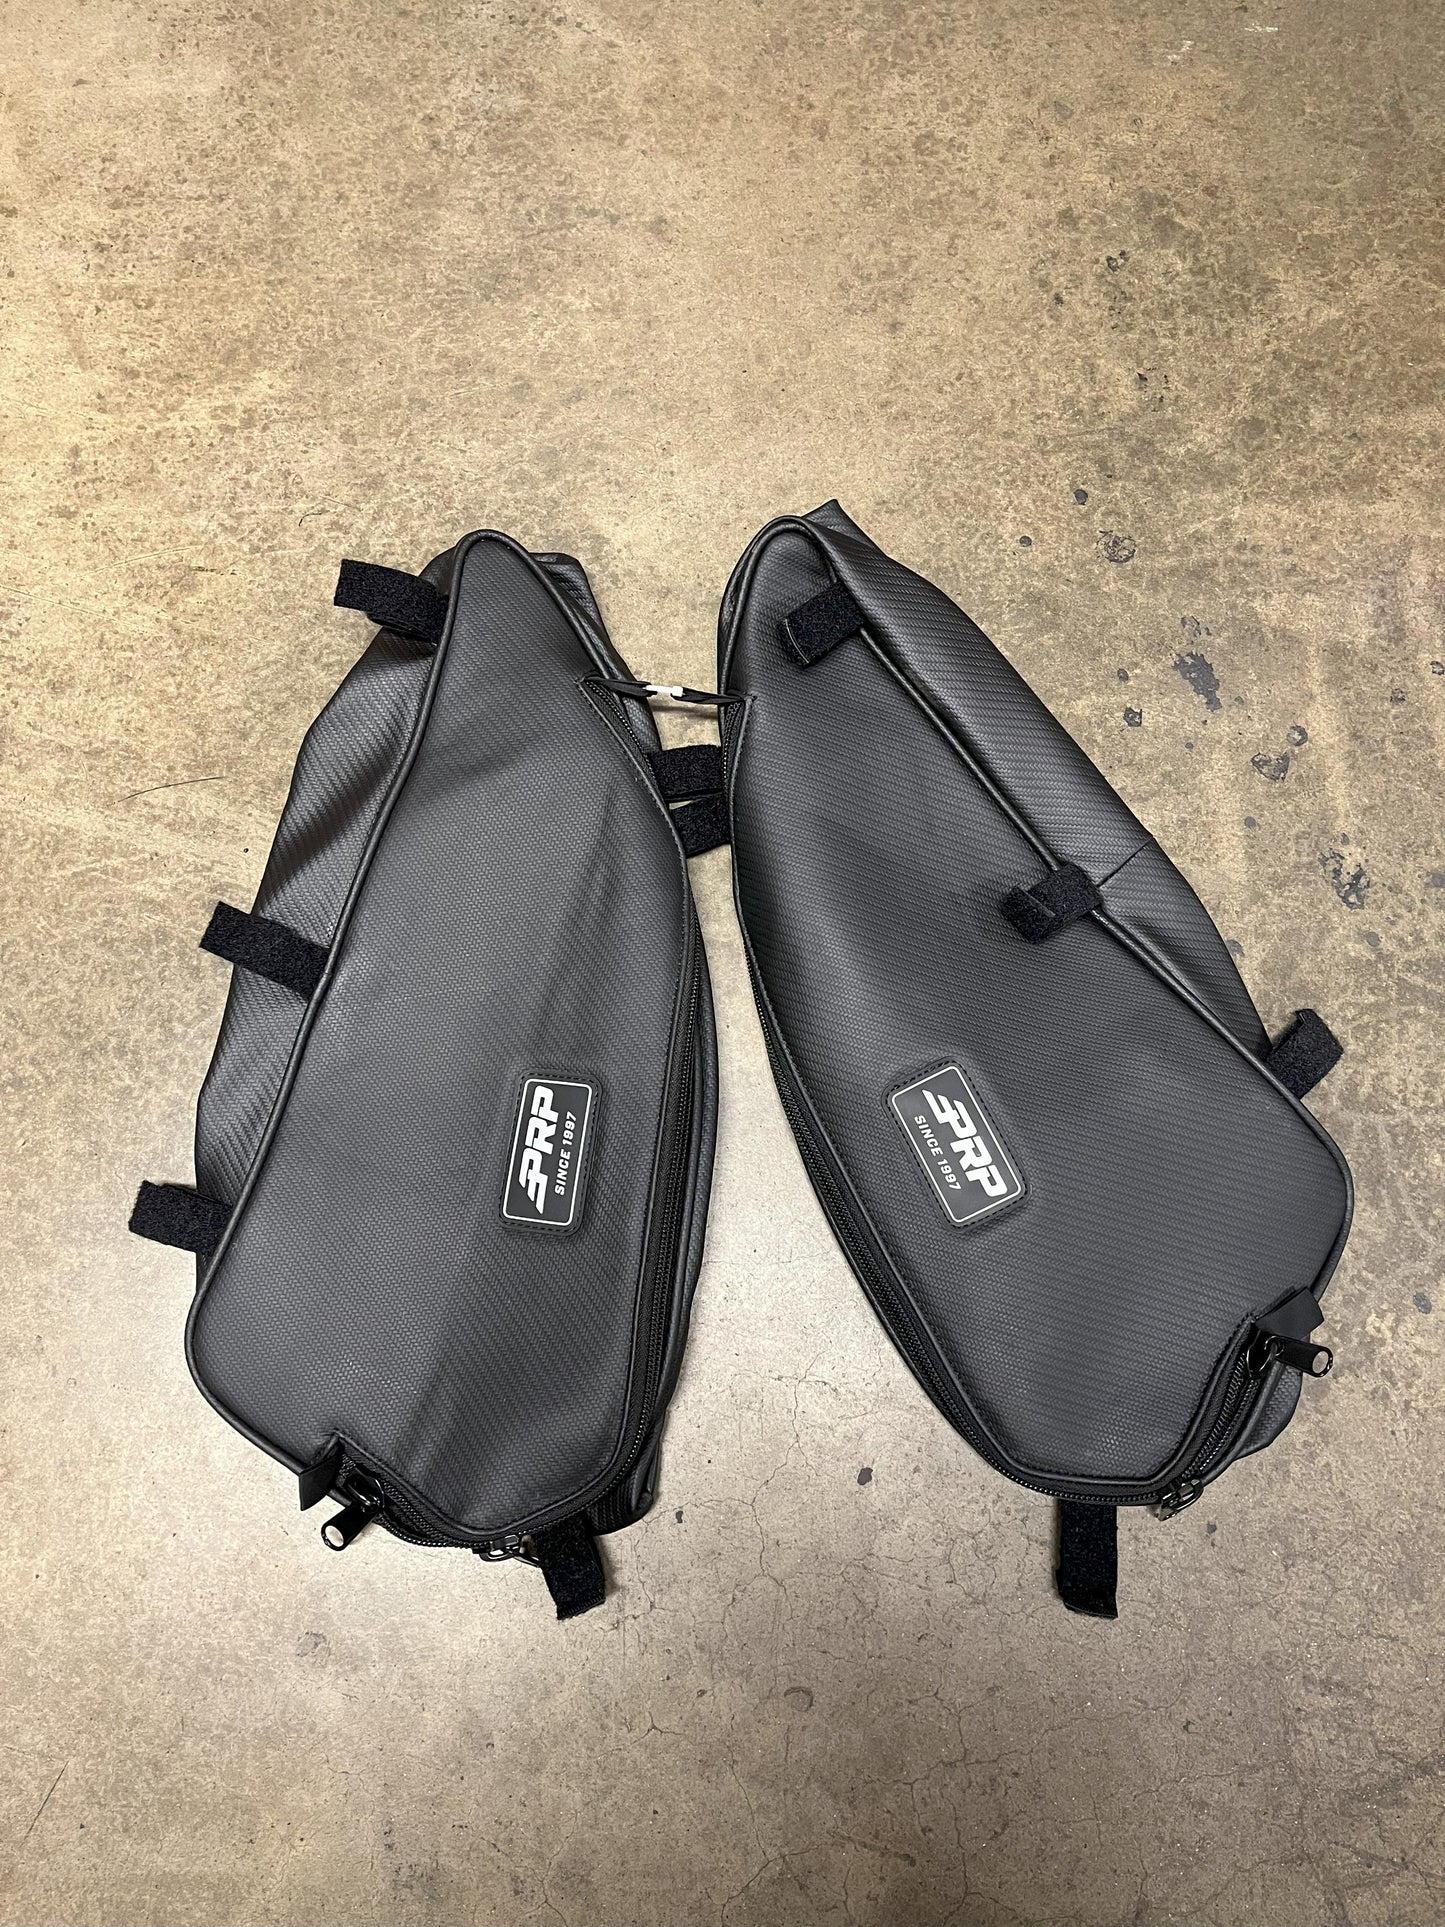 CAN AM X3 PRP Storage Bags for Bed Rack